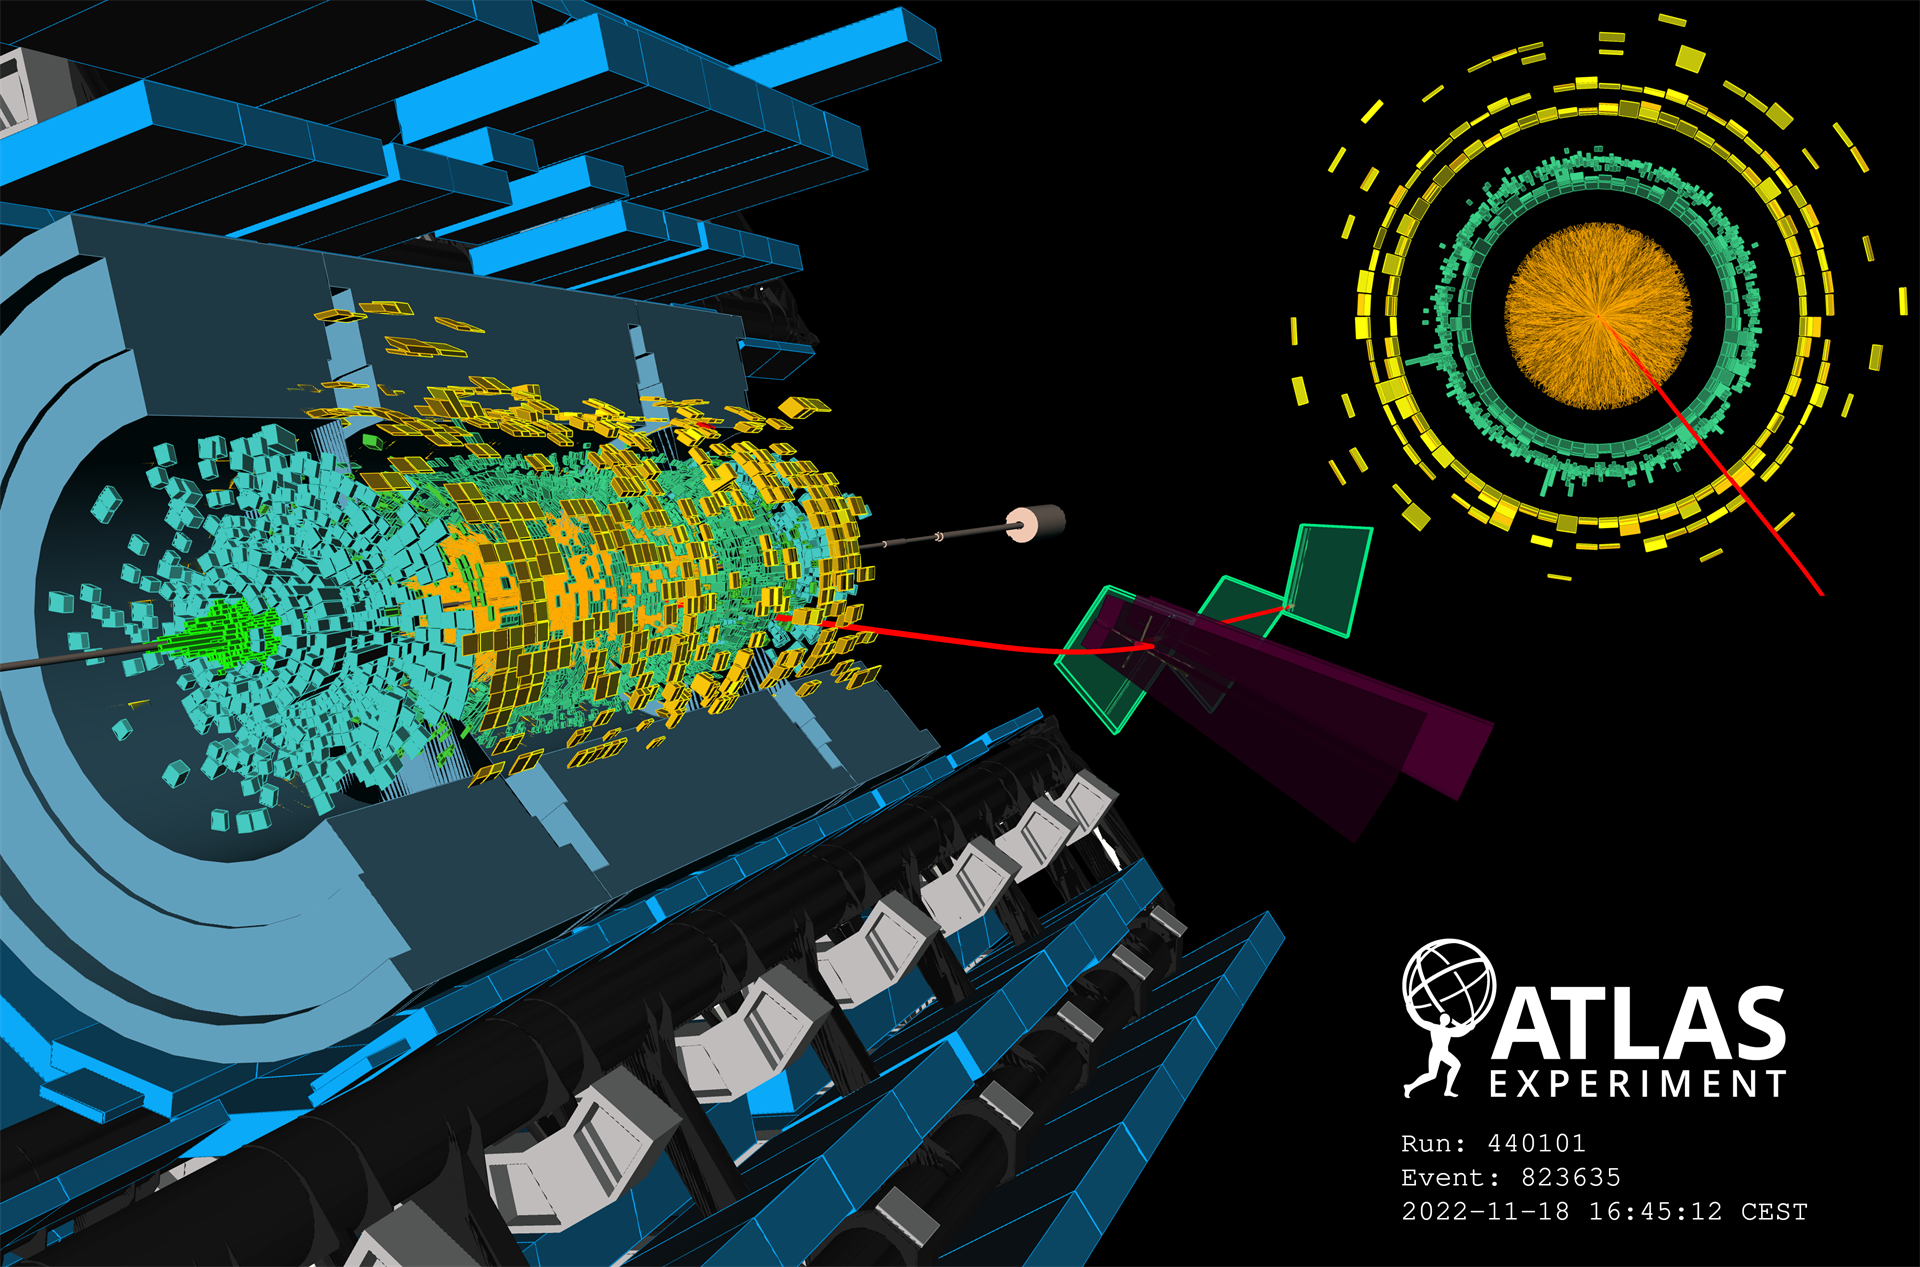 Lead-lead event display in 3D blowout, from the 2022 LHC Heavy Ion pilot run on November 18, 2022. Orange, green, and cyan boxes indicate energy deposits in the calorimeter systems. Orange lines indicate the trajectories of charged particles recorded by the inner detector tracking systems. Image courtesy of CERN/ATLAS